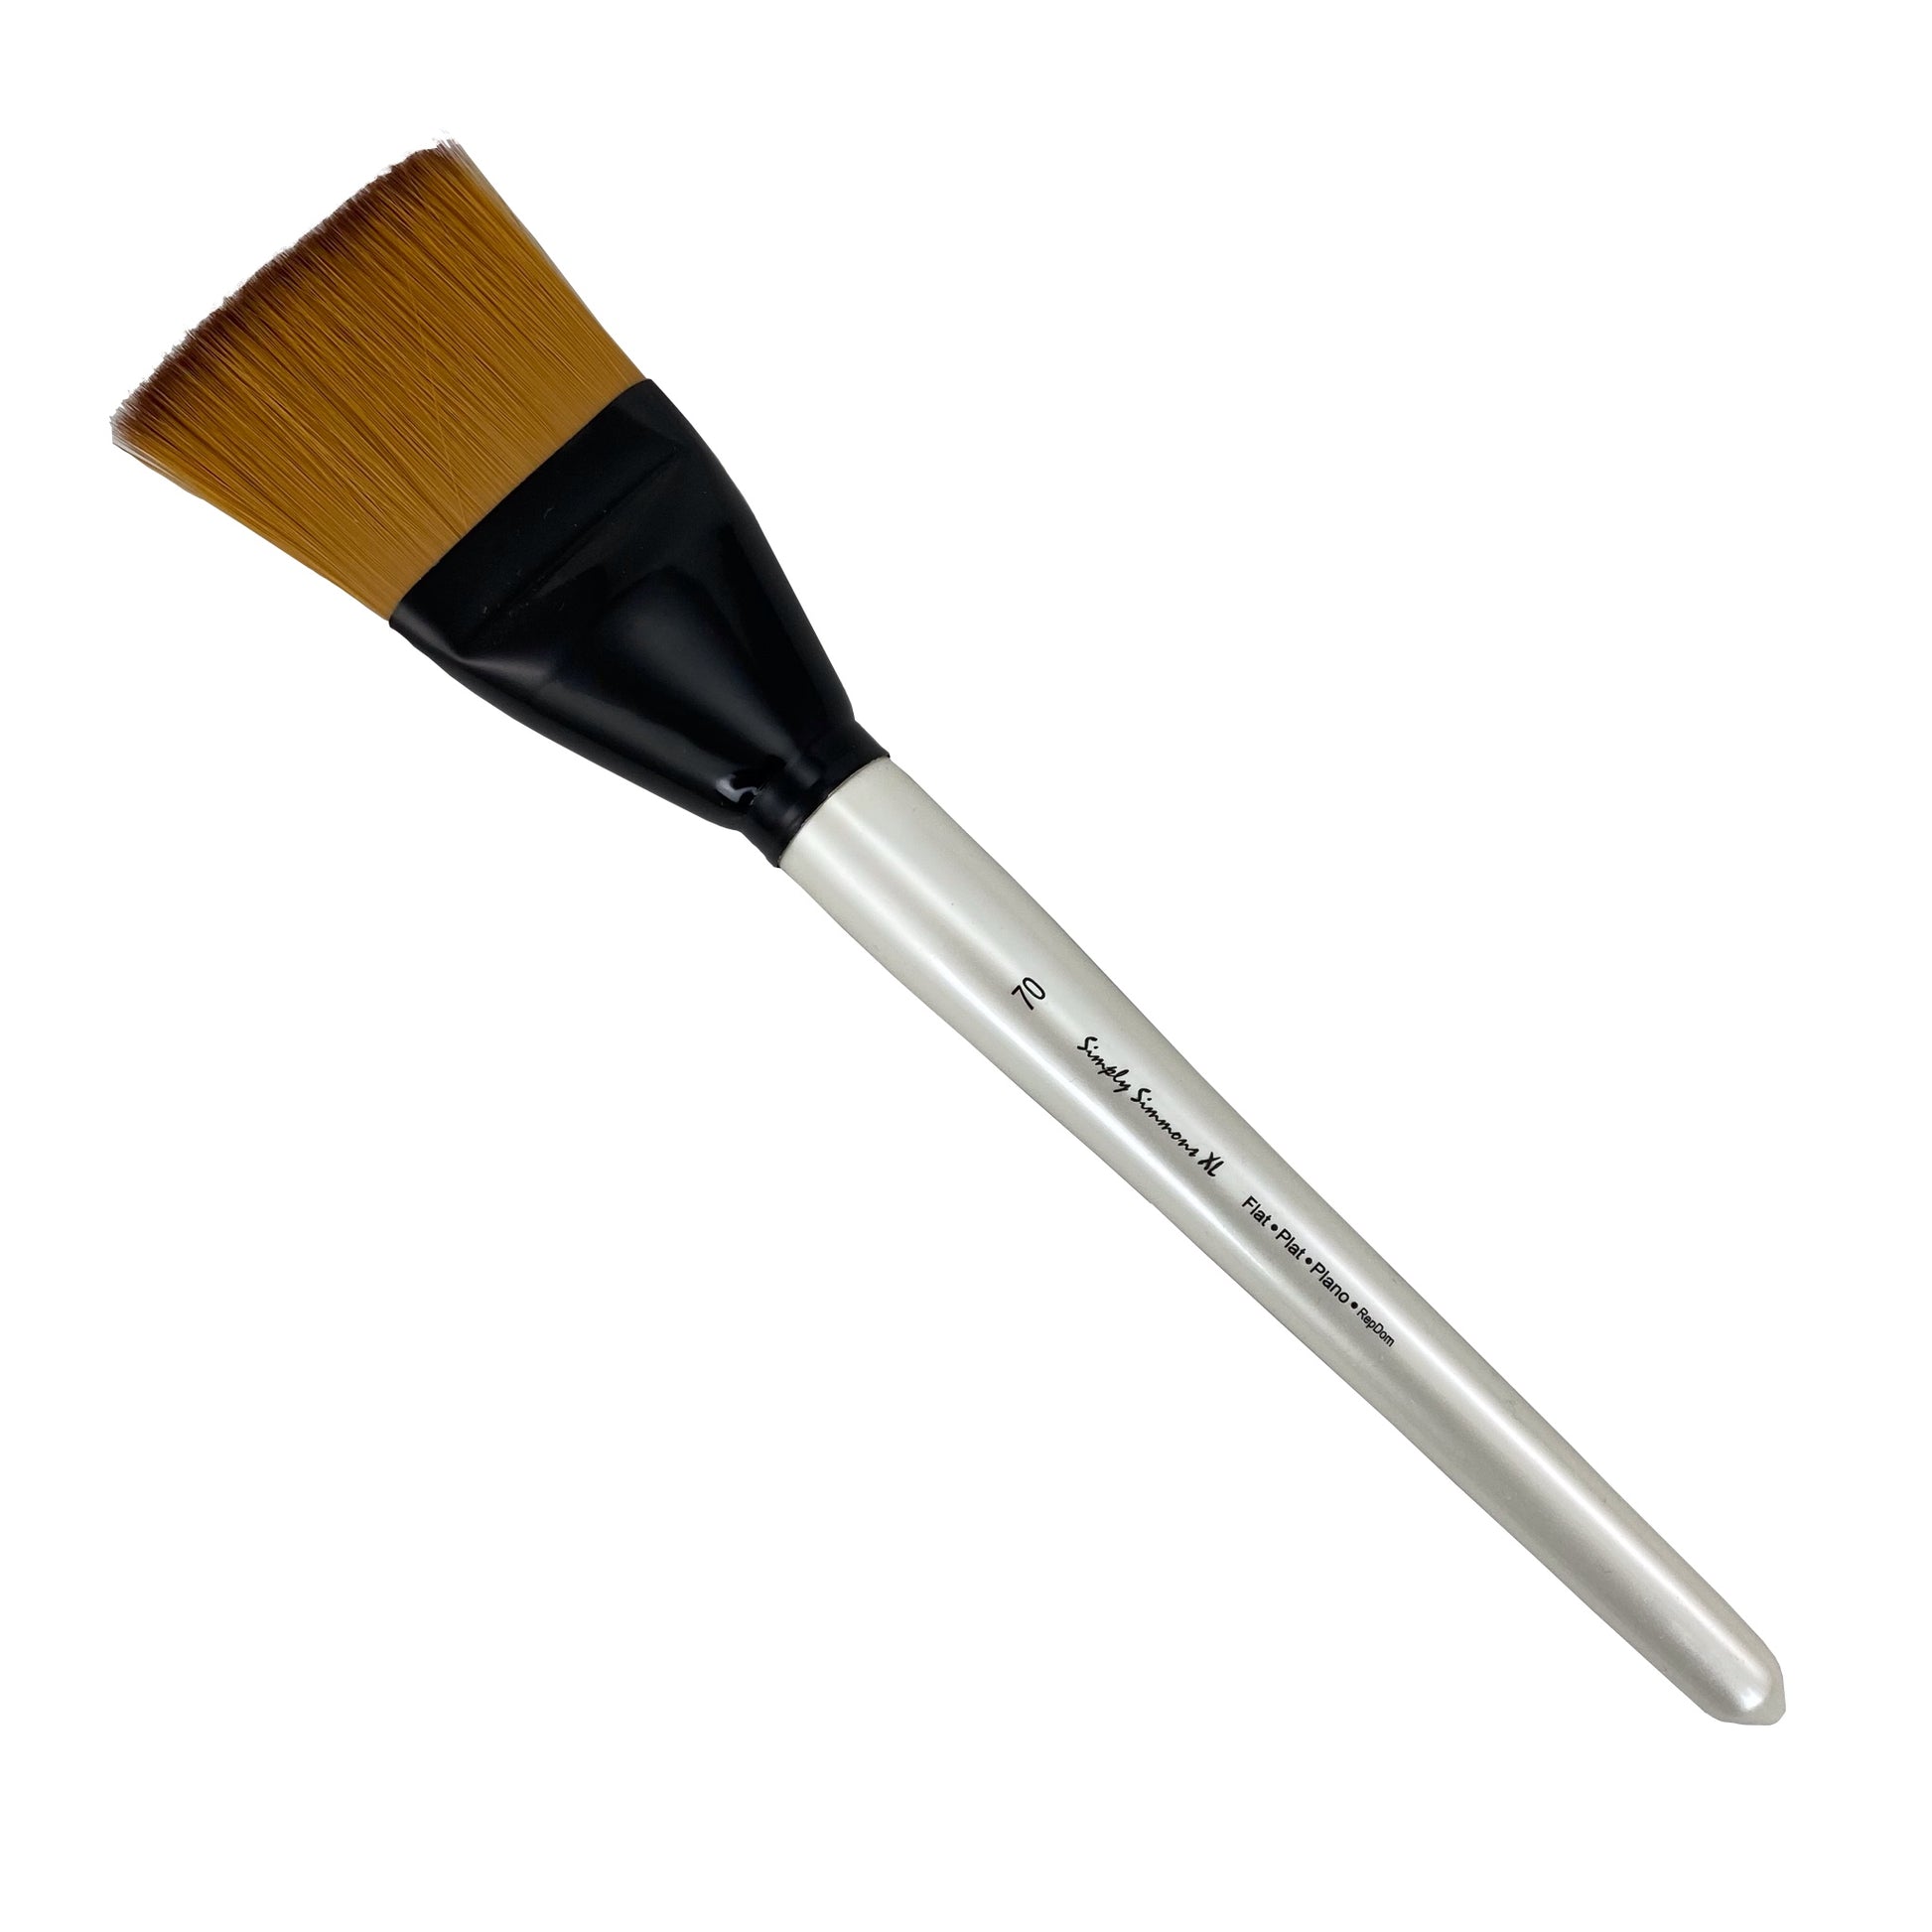 Simply Simmons XL Brushes - Flat / #70 / Soft Synthetic by Robert Simmons - K. A. Artist Shop